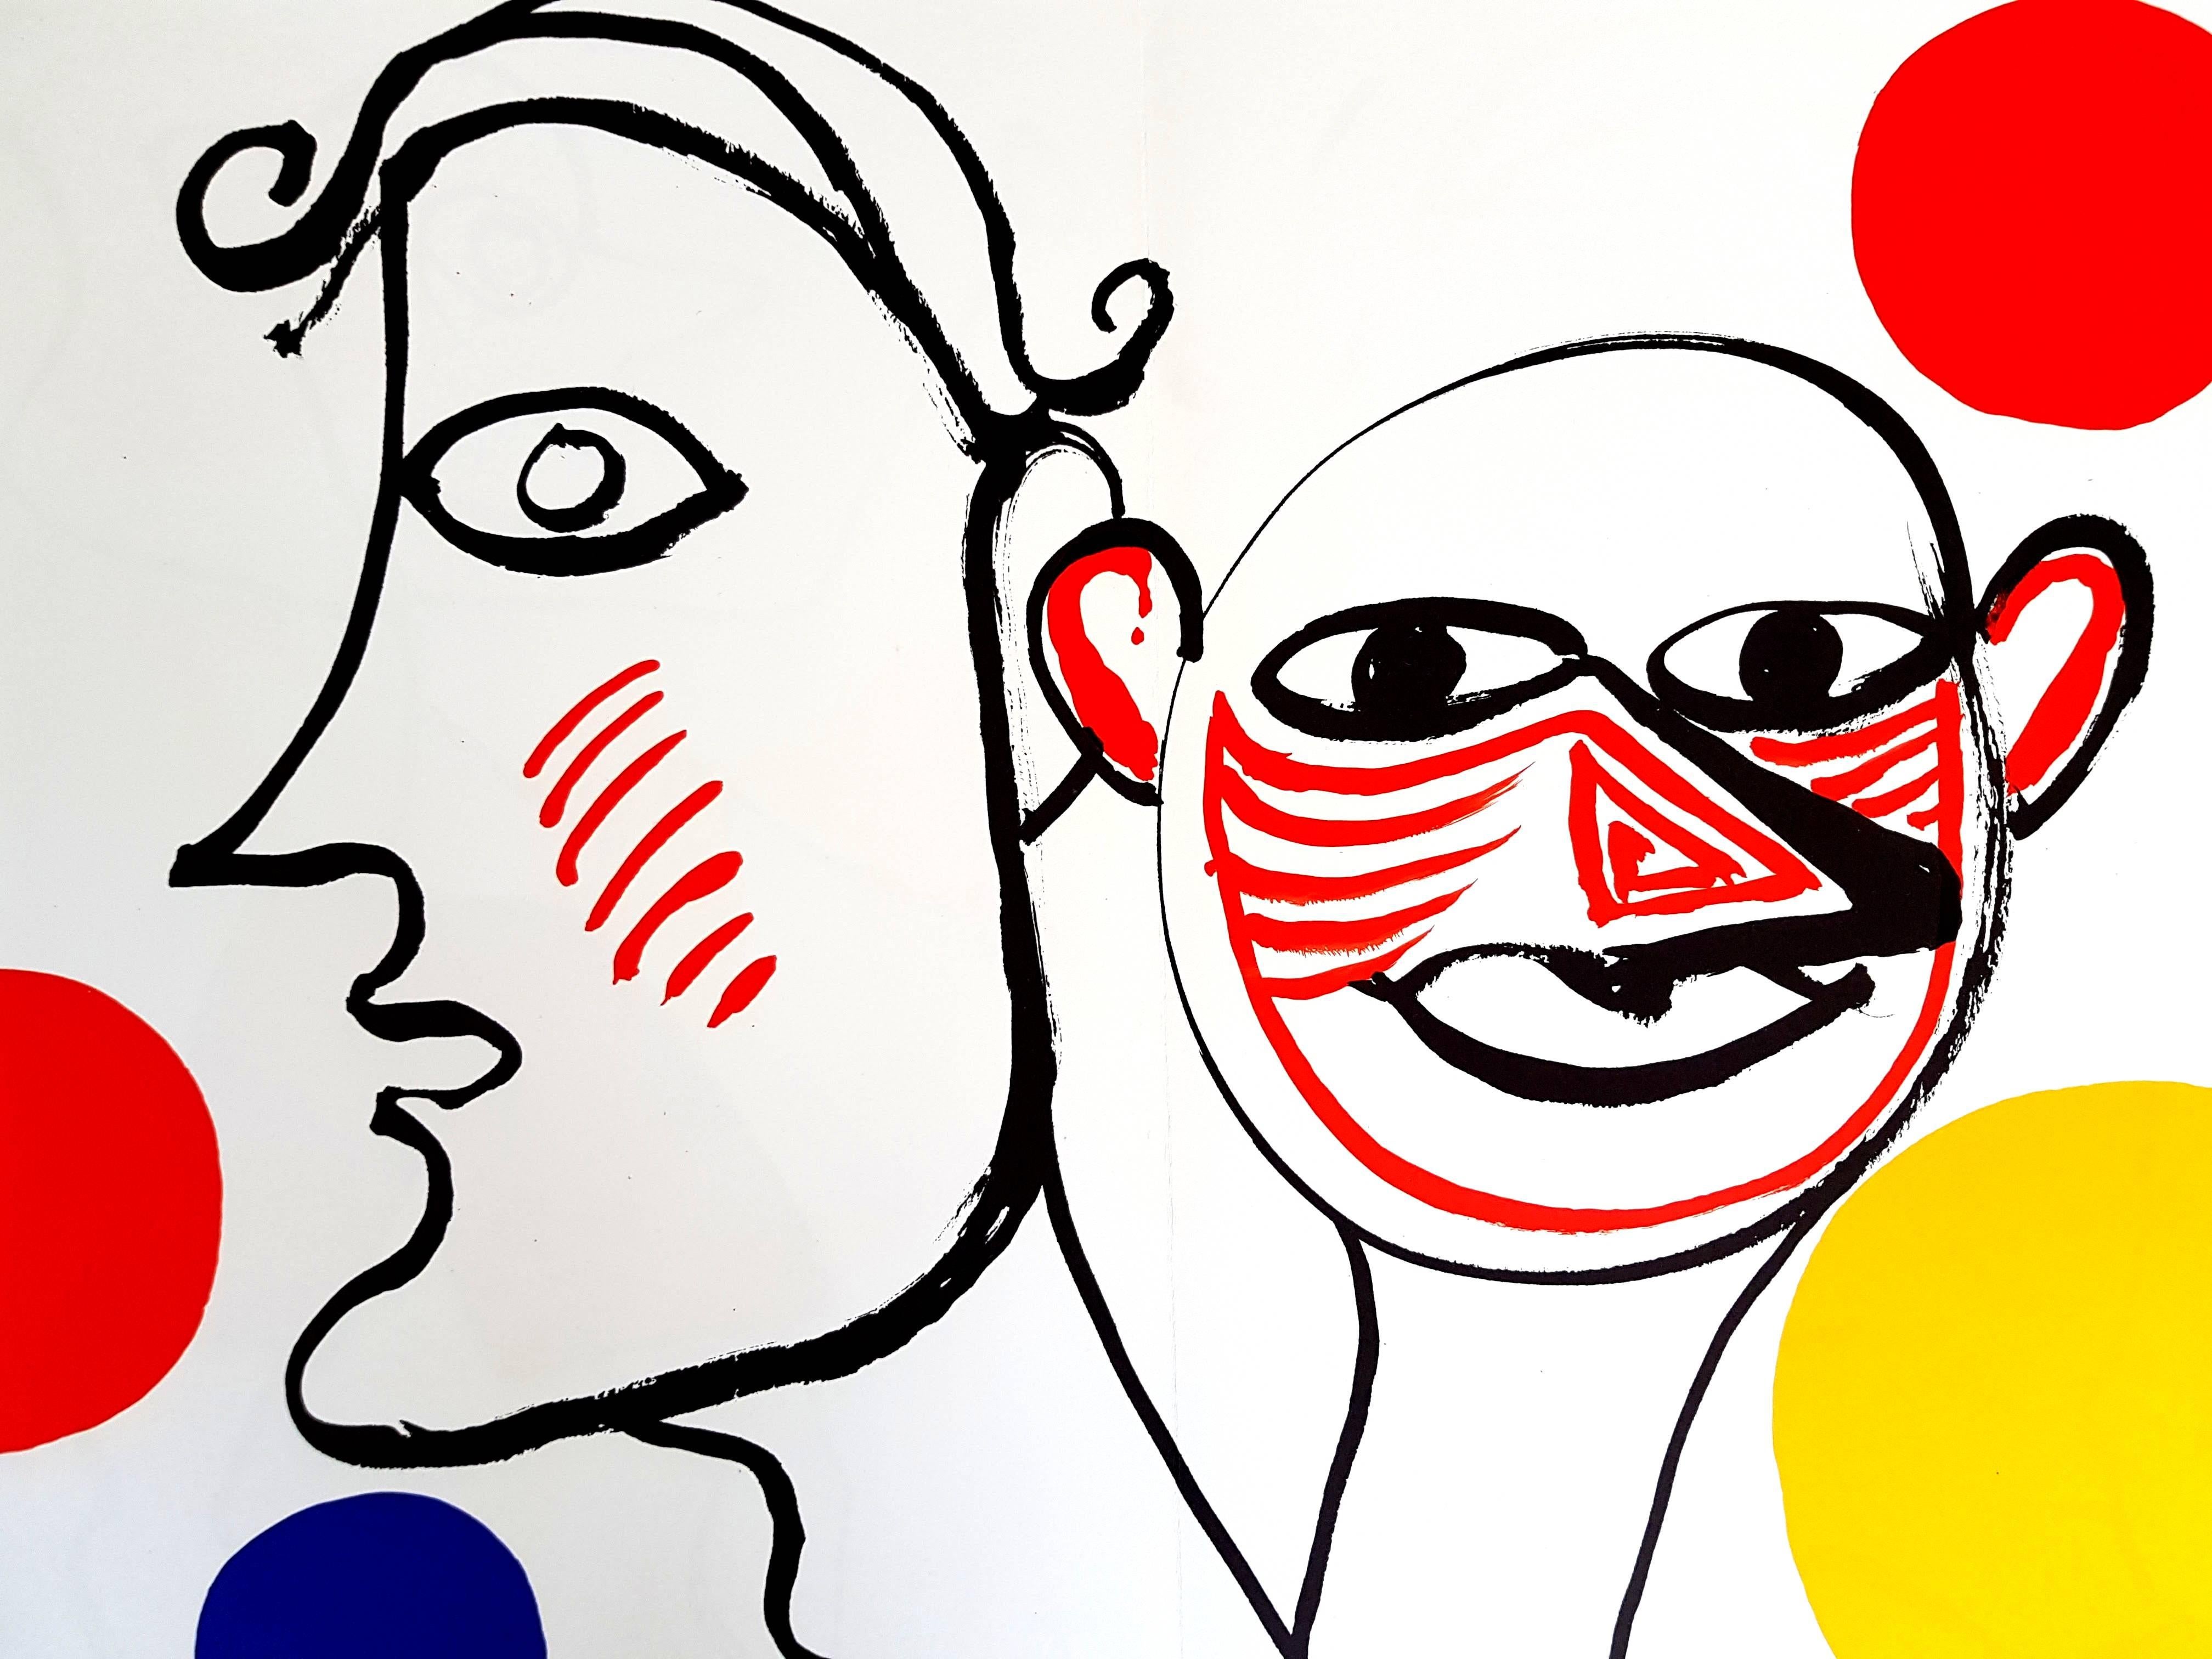 Alexander Calder - Original Lithograph - Behind the Mirror
2 Original lithographs on the same paper (recto/verso, on both paper sides) produced in 1976 
Conditions: Good Conditions
Dimensions: 38 x 56 cm
Source: Derrière le miroir (DLM), n°221,